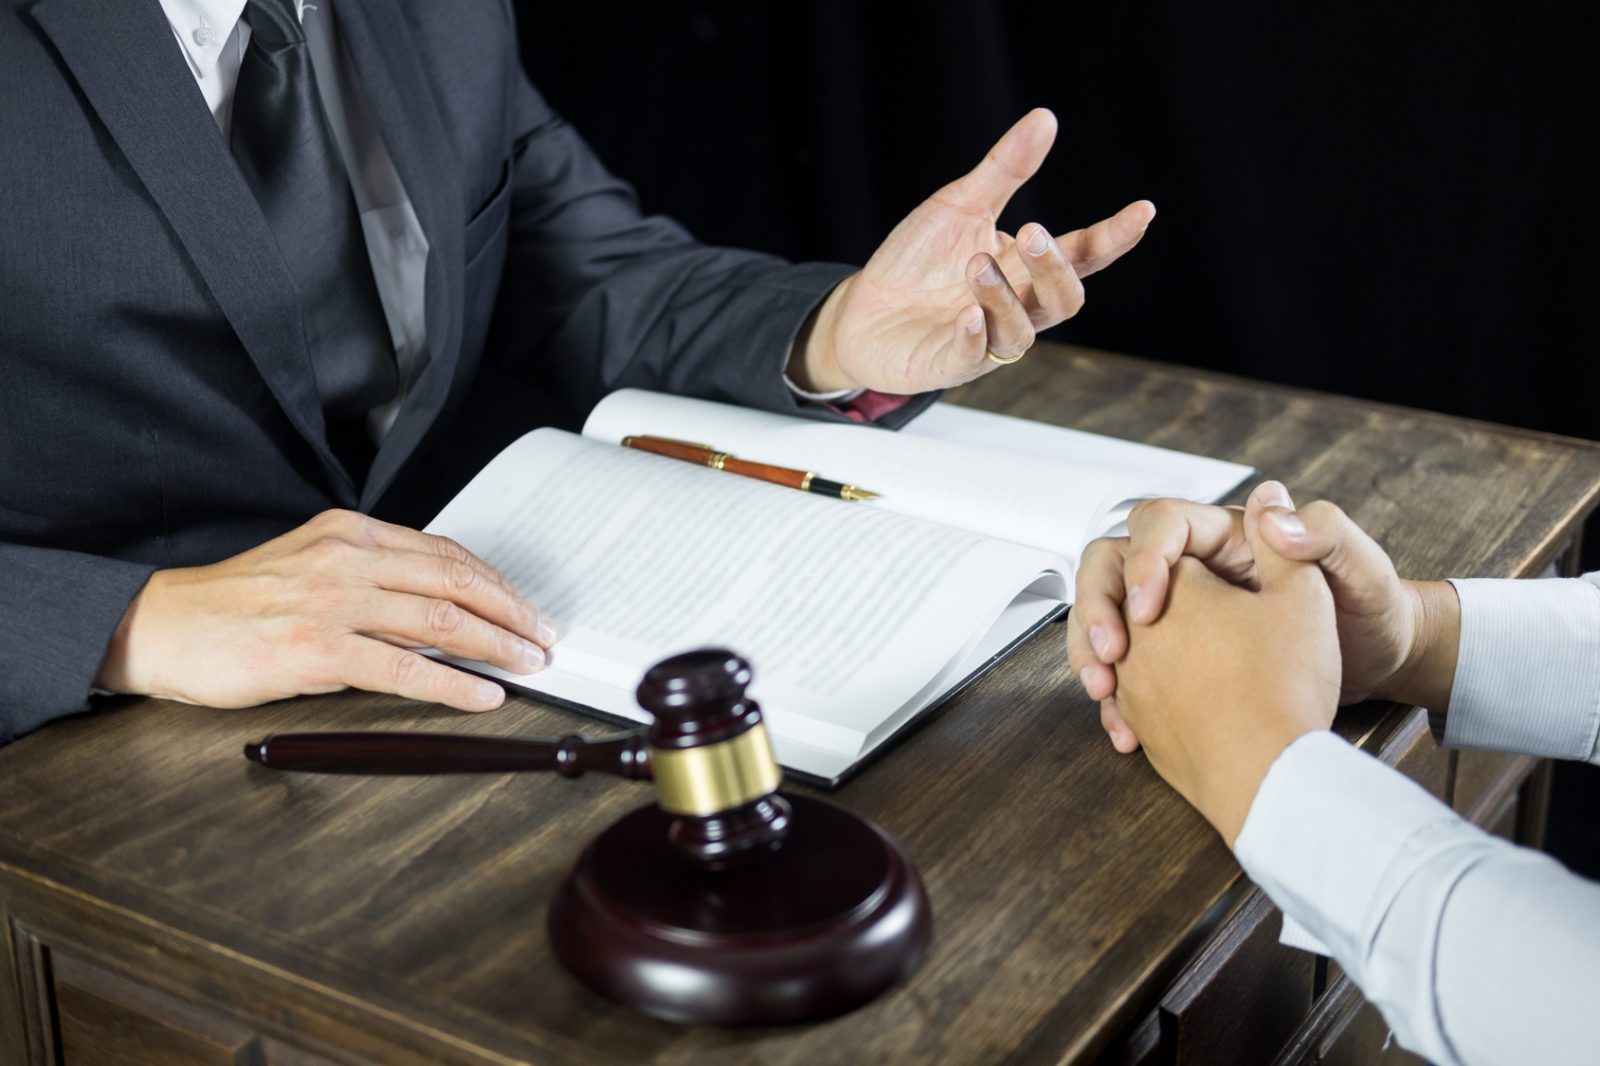 Q: What should I do to prepare before meeting with my attorney for the first time?